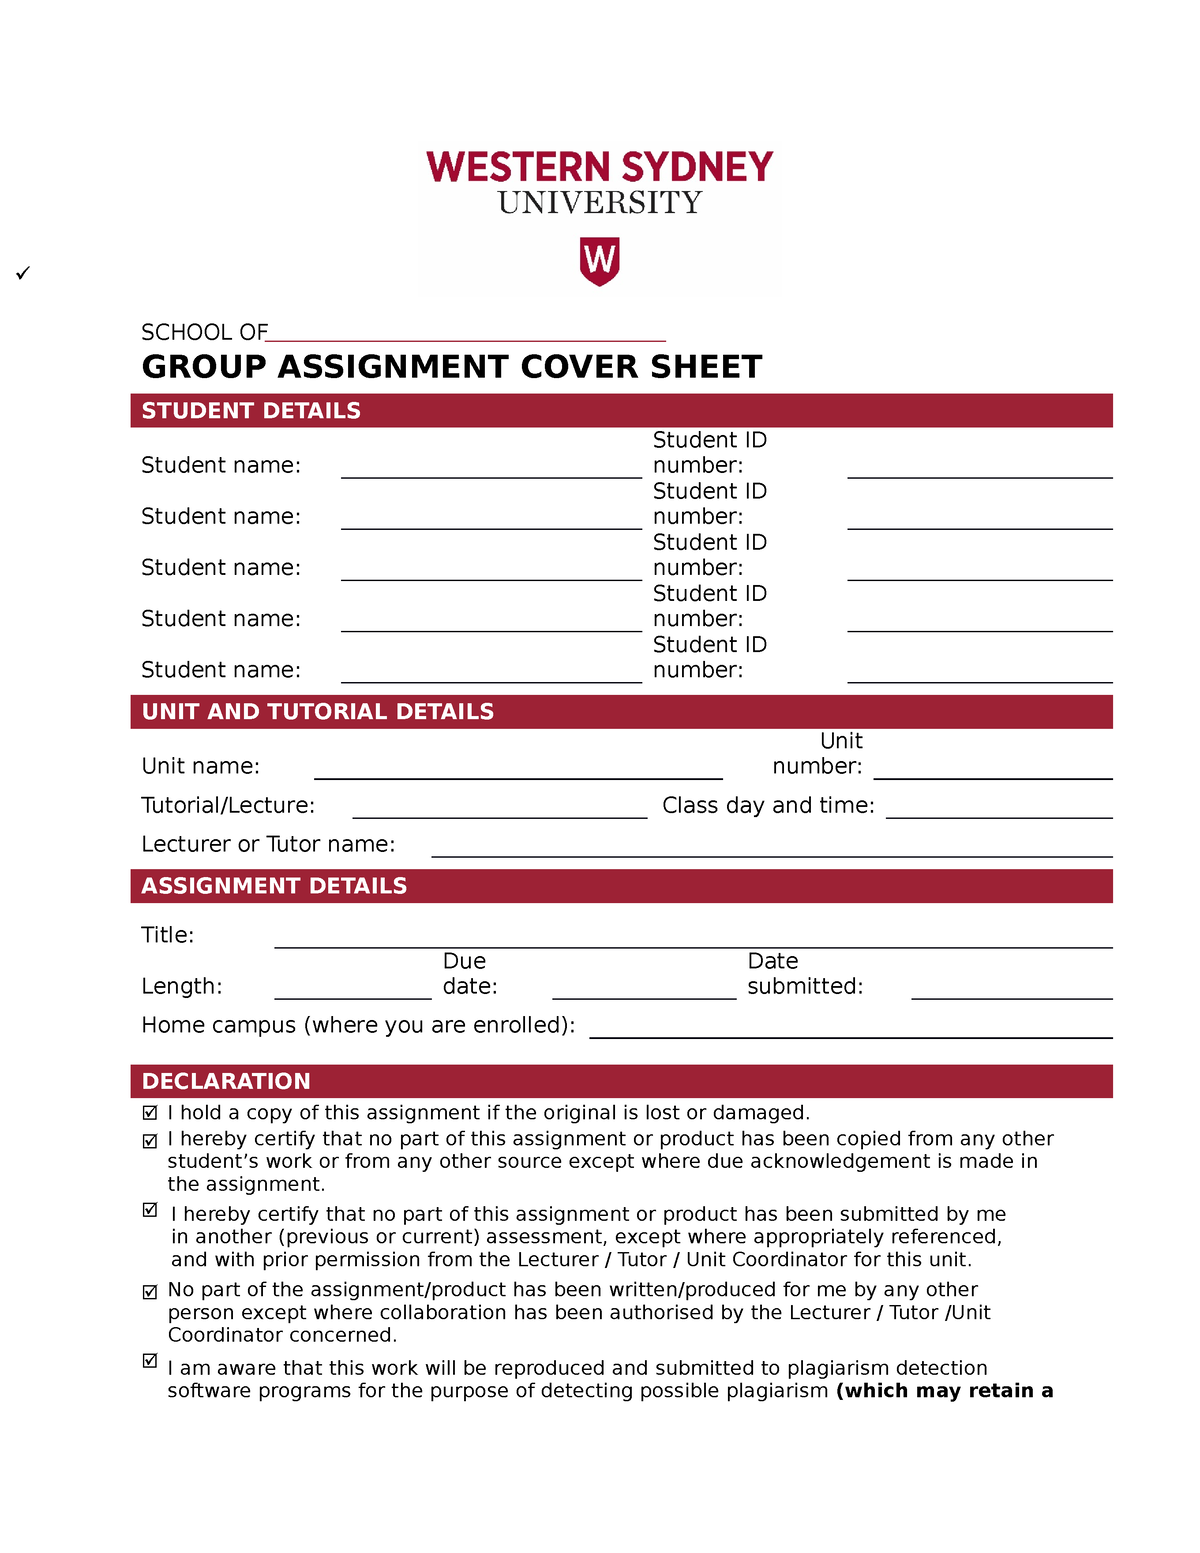 wsu group assignment cover sheet